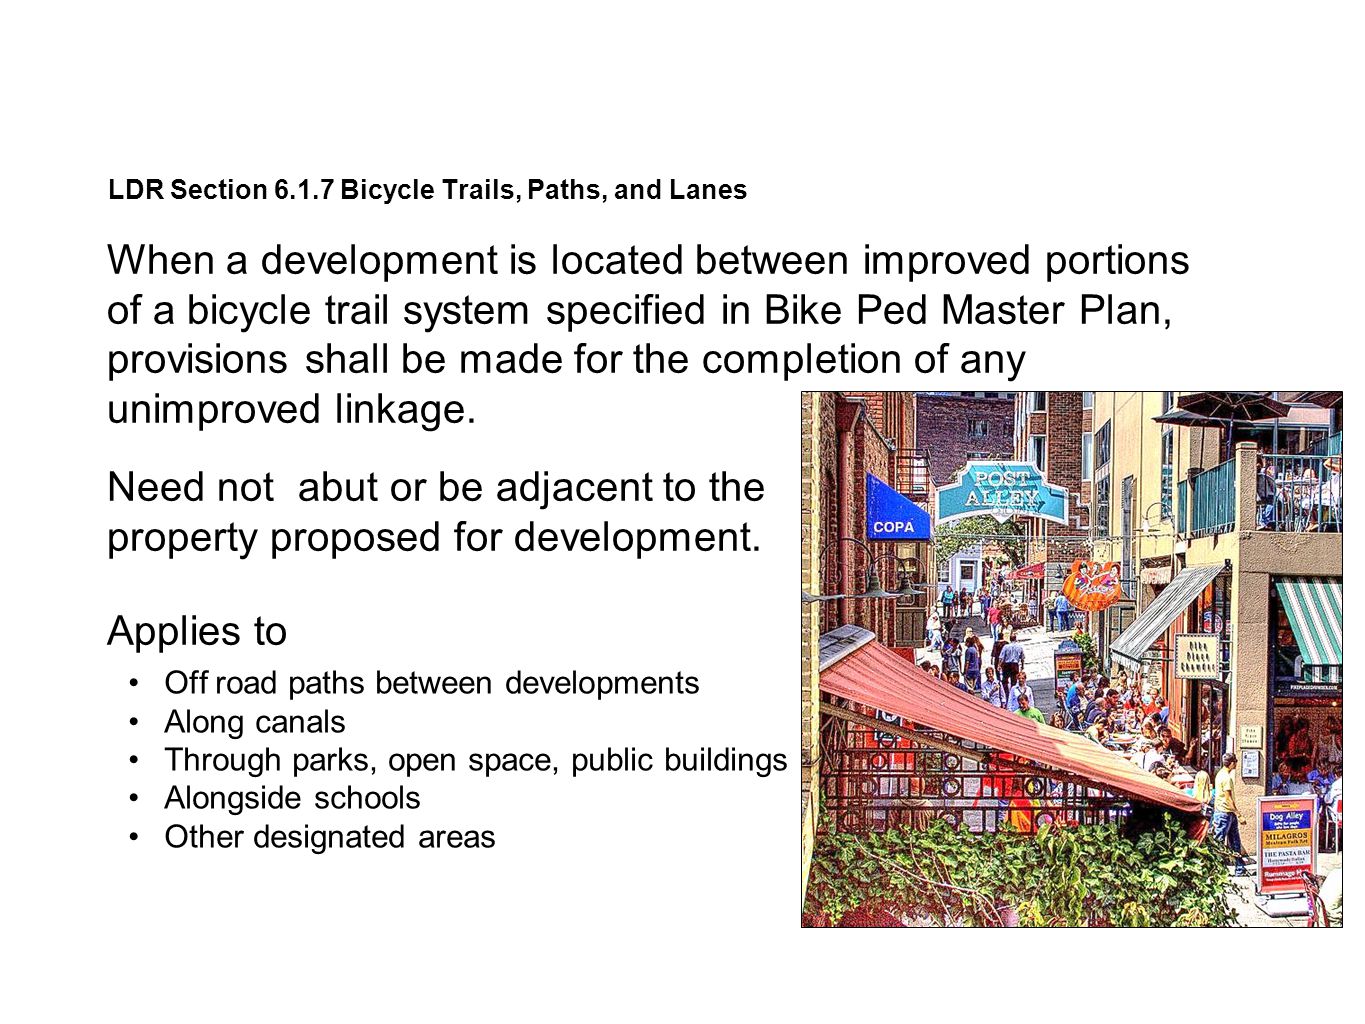 When a development is located between improved portions of a bicycle trail system specified in Bike Ped Master Plan, provisions shall be made for the completion of any unimproved linkage.